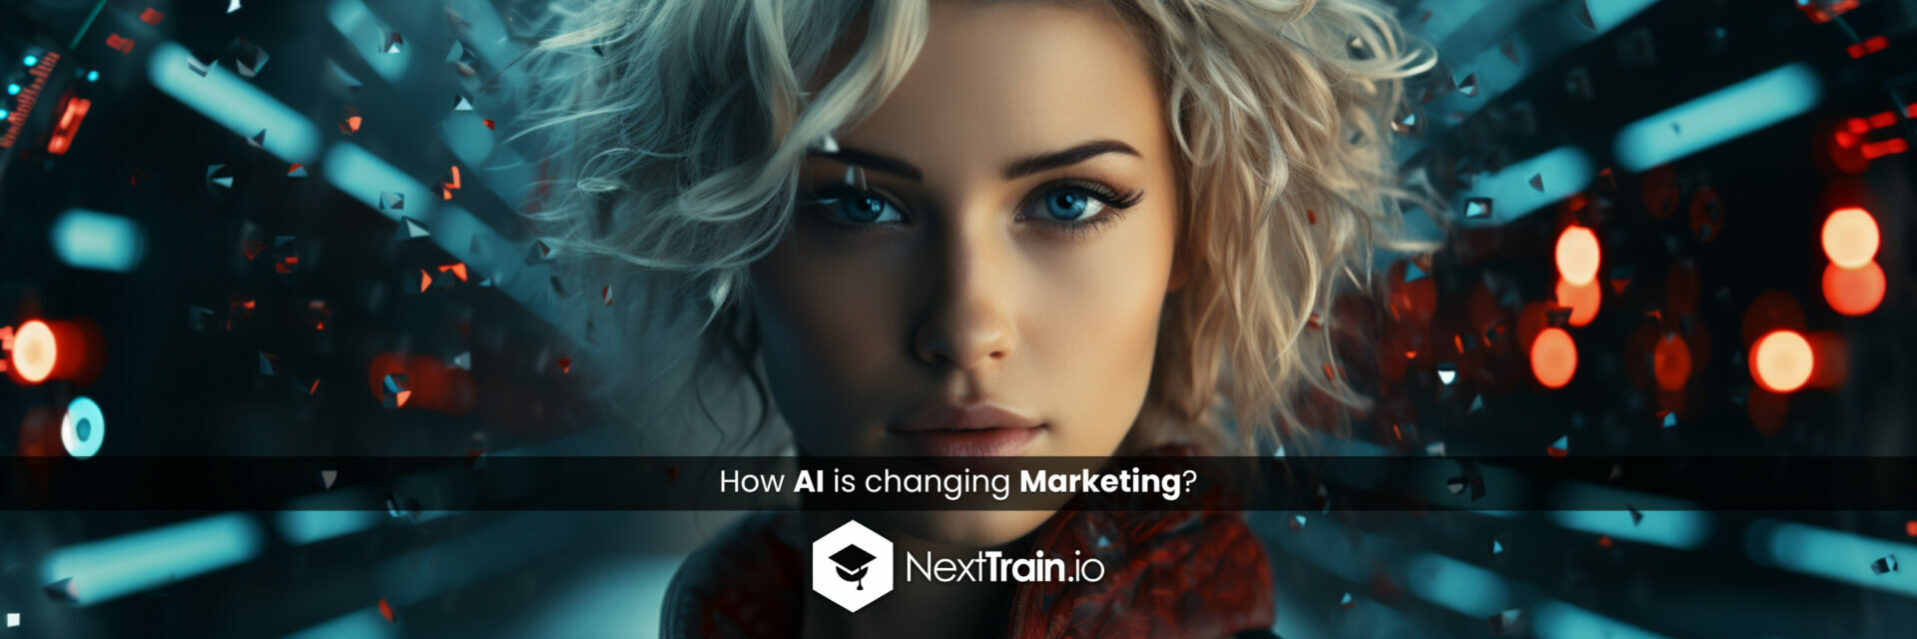 How AI is changing Marketing?